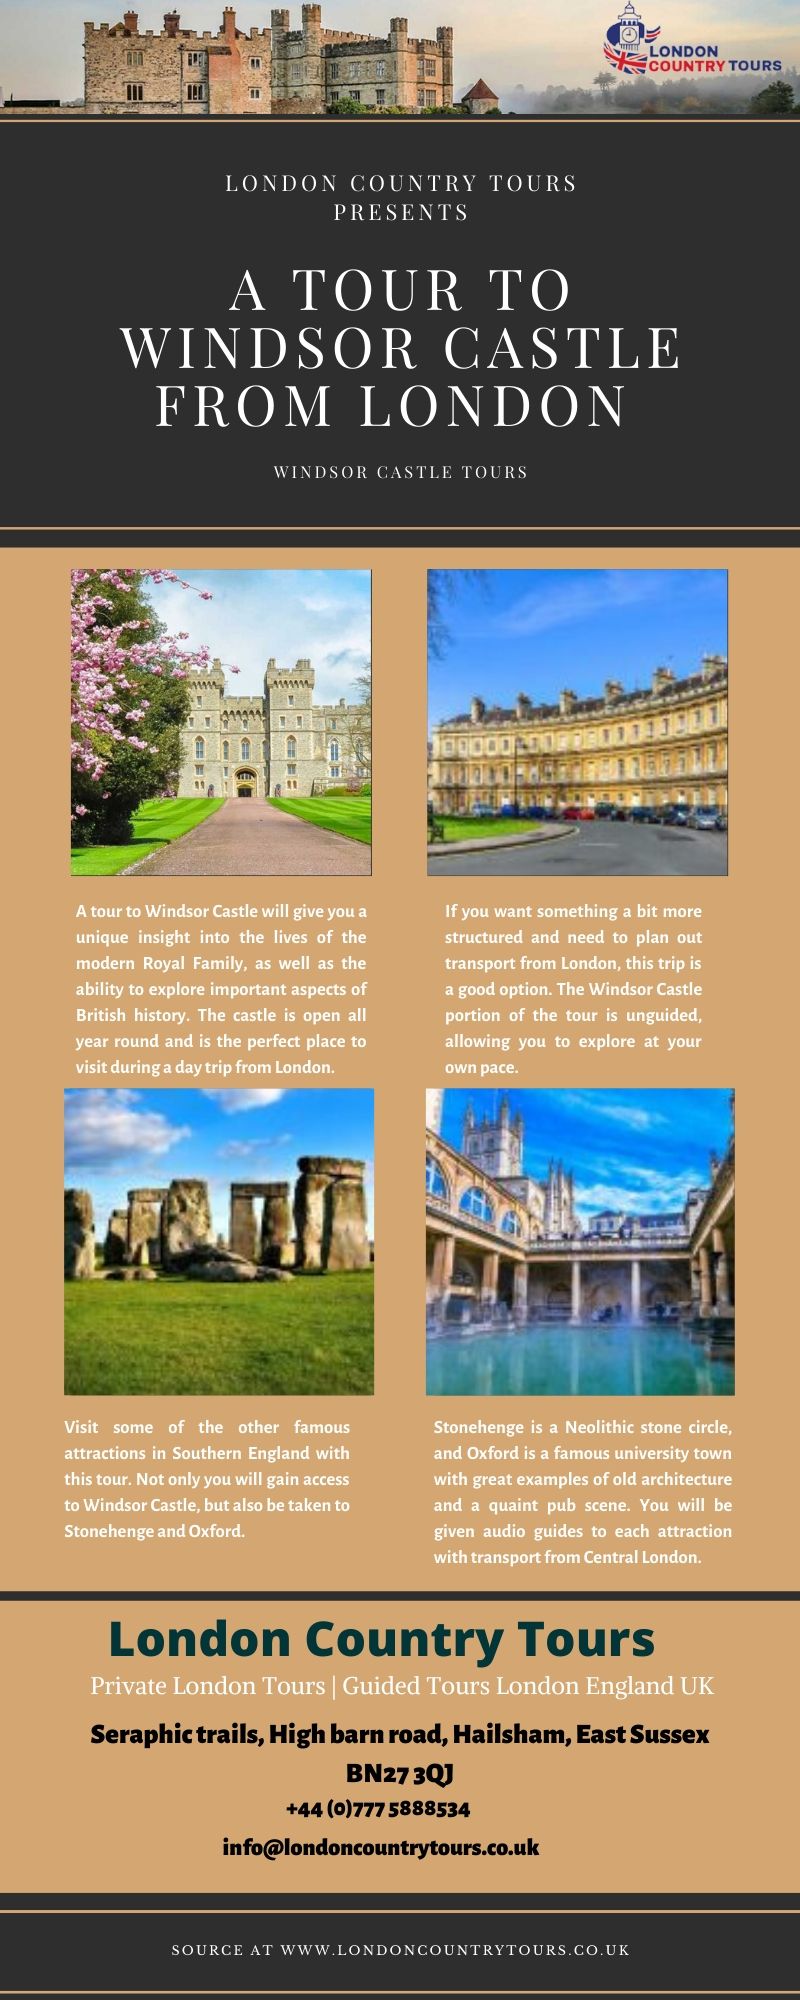 A Tour to Windsor Castle from London – London Country Tours.jpg Experience one of London’s most magnificent royal palaces during a day tour to Windsor Castle. London Country Tours will help to find the right tour for you, whether you want to visit the castle or fancy exploring other historic sites.
 by LondonCountryTours